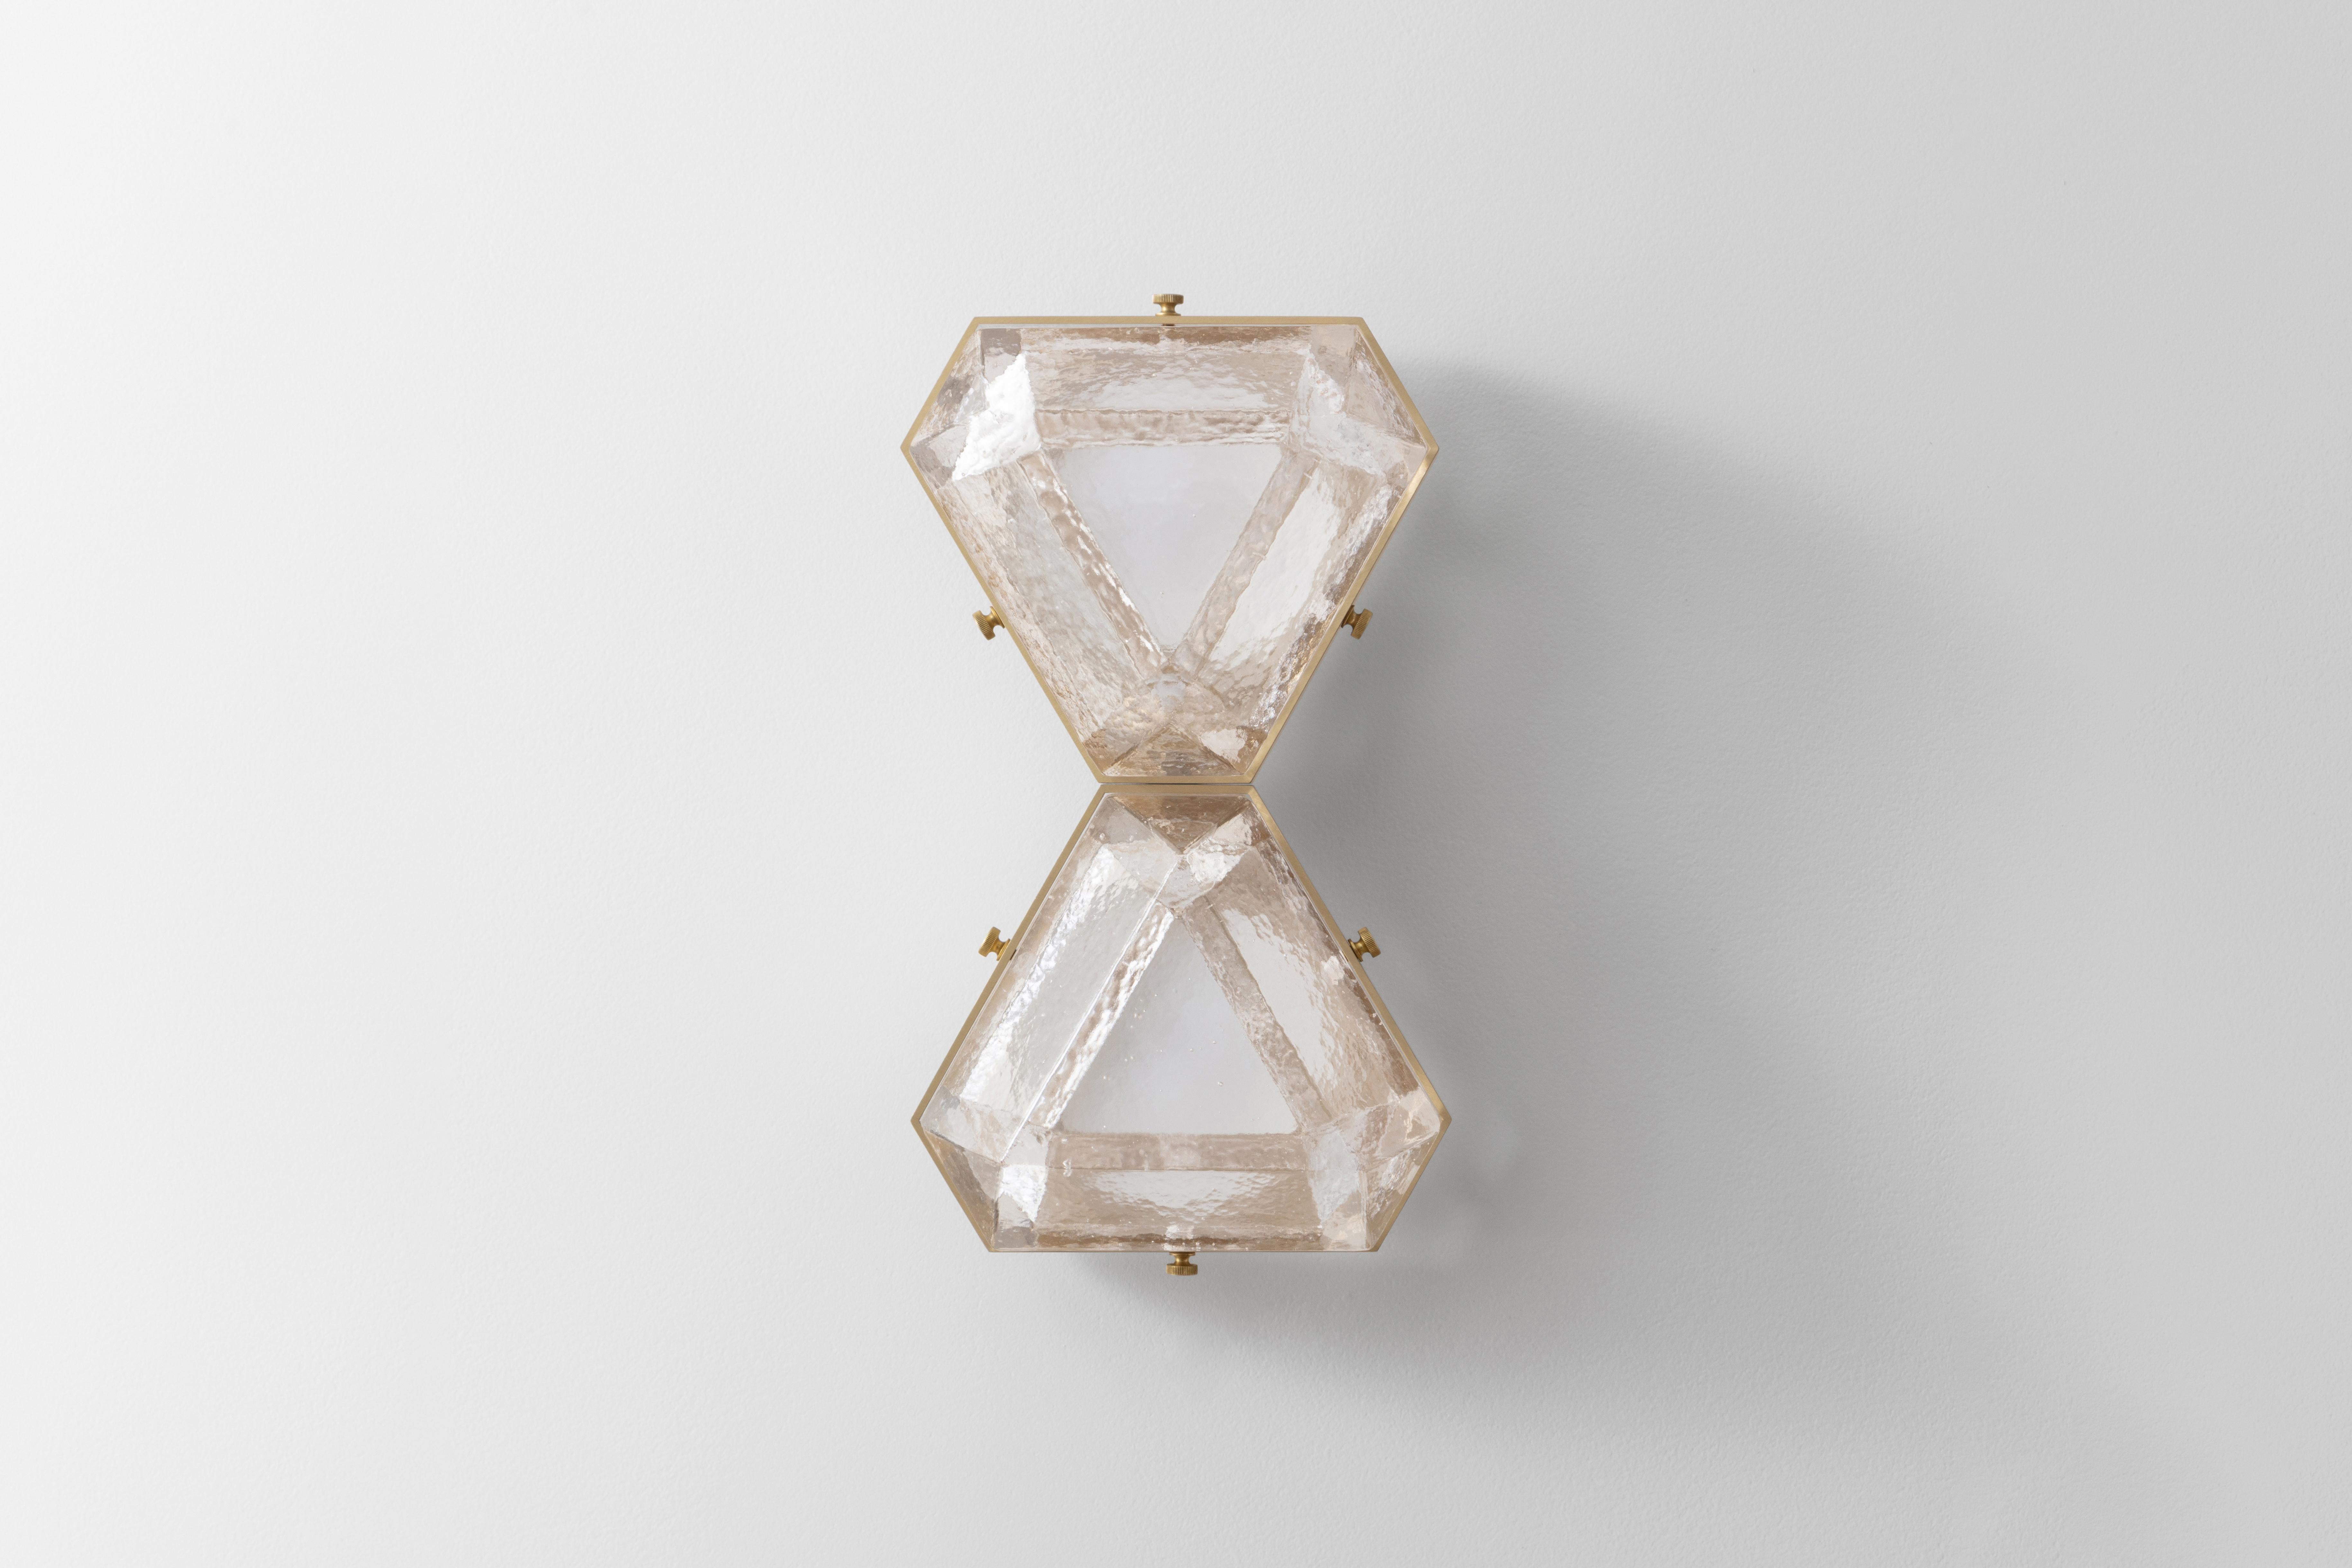 The Vega Due is a geometric, modular, contemporary lighting fixture. Vega is suitable for installation on the ceiling as a flush mount, or on the wall as a sconce. The body is made from extruded aluminum with brass accents. The diffusers are cast